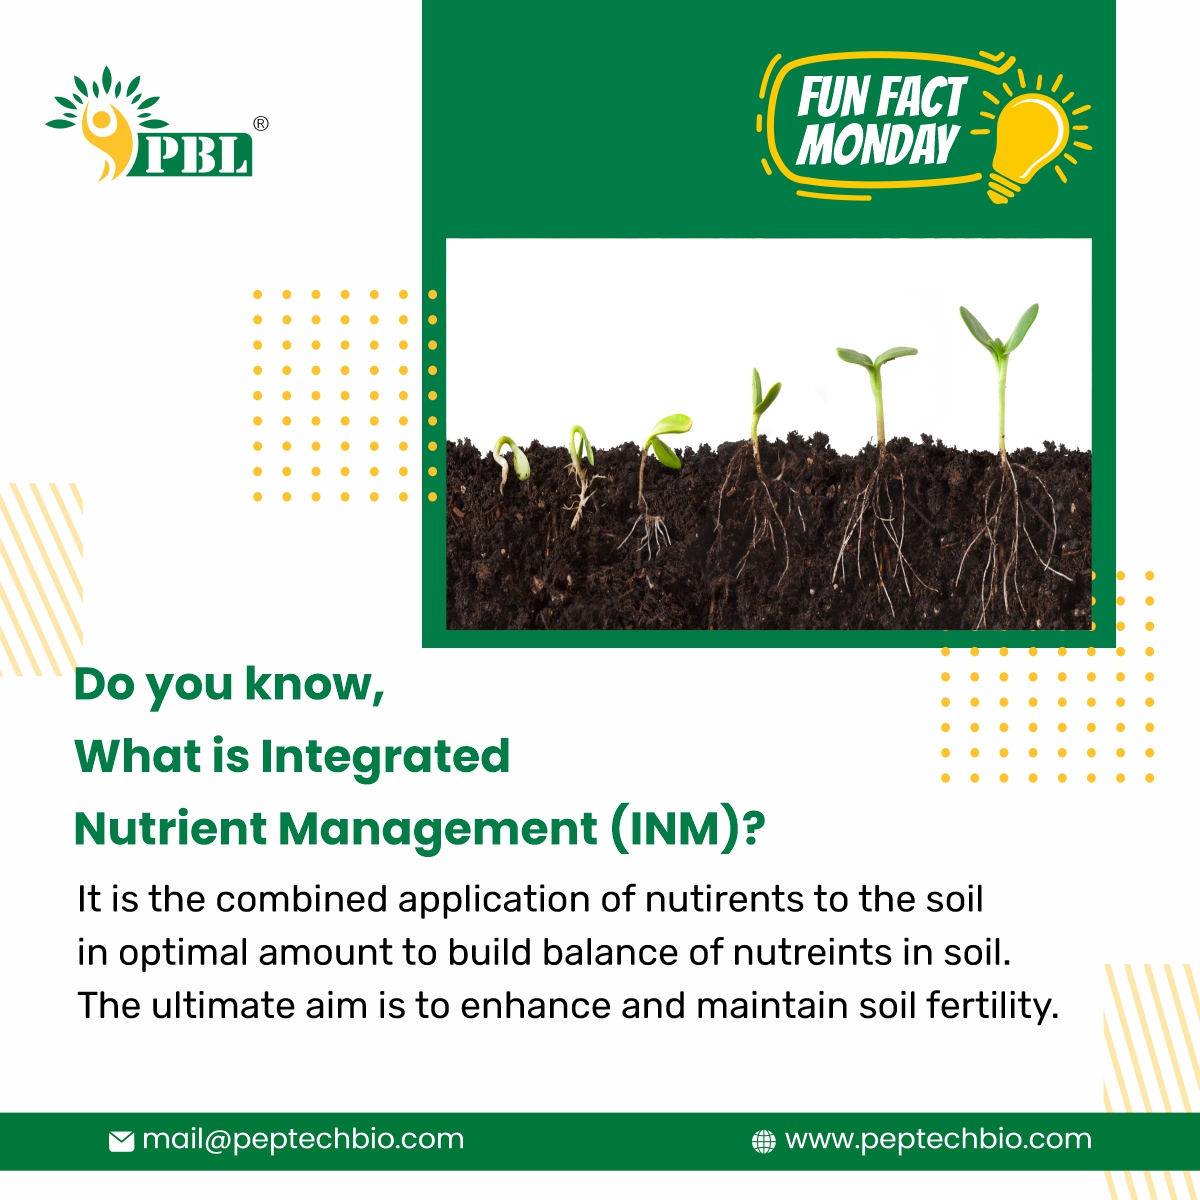 It is necessary to balance the soil nutrient input with the crop requirement. If the nutrients are applied at the right time and in adequate quantities, optimum crop yield is obtained. 
#agriculture #peptech #farming #crops #cropproduction #soil #nutrients #plantnutrients https://t.co/aV3Rzi8MDm